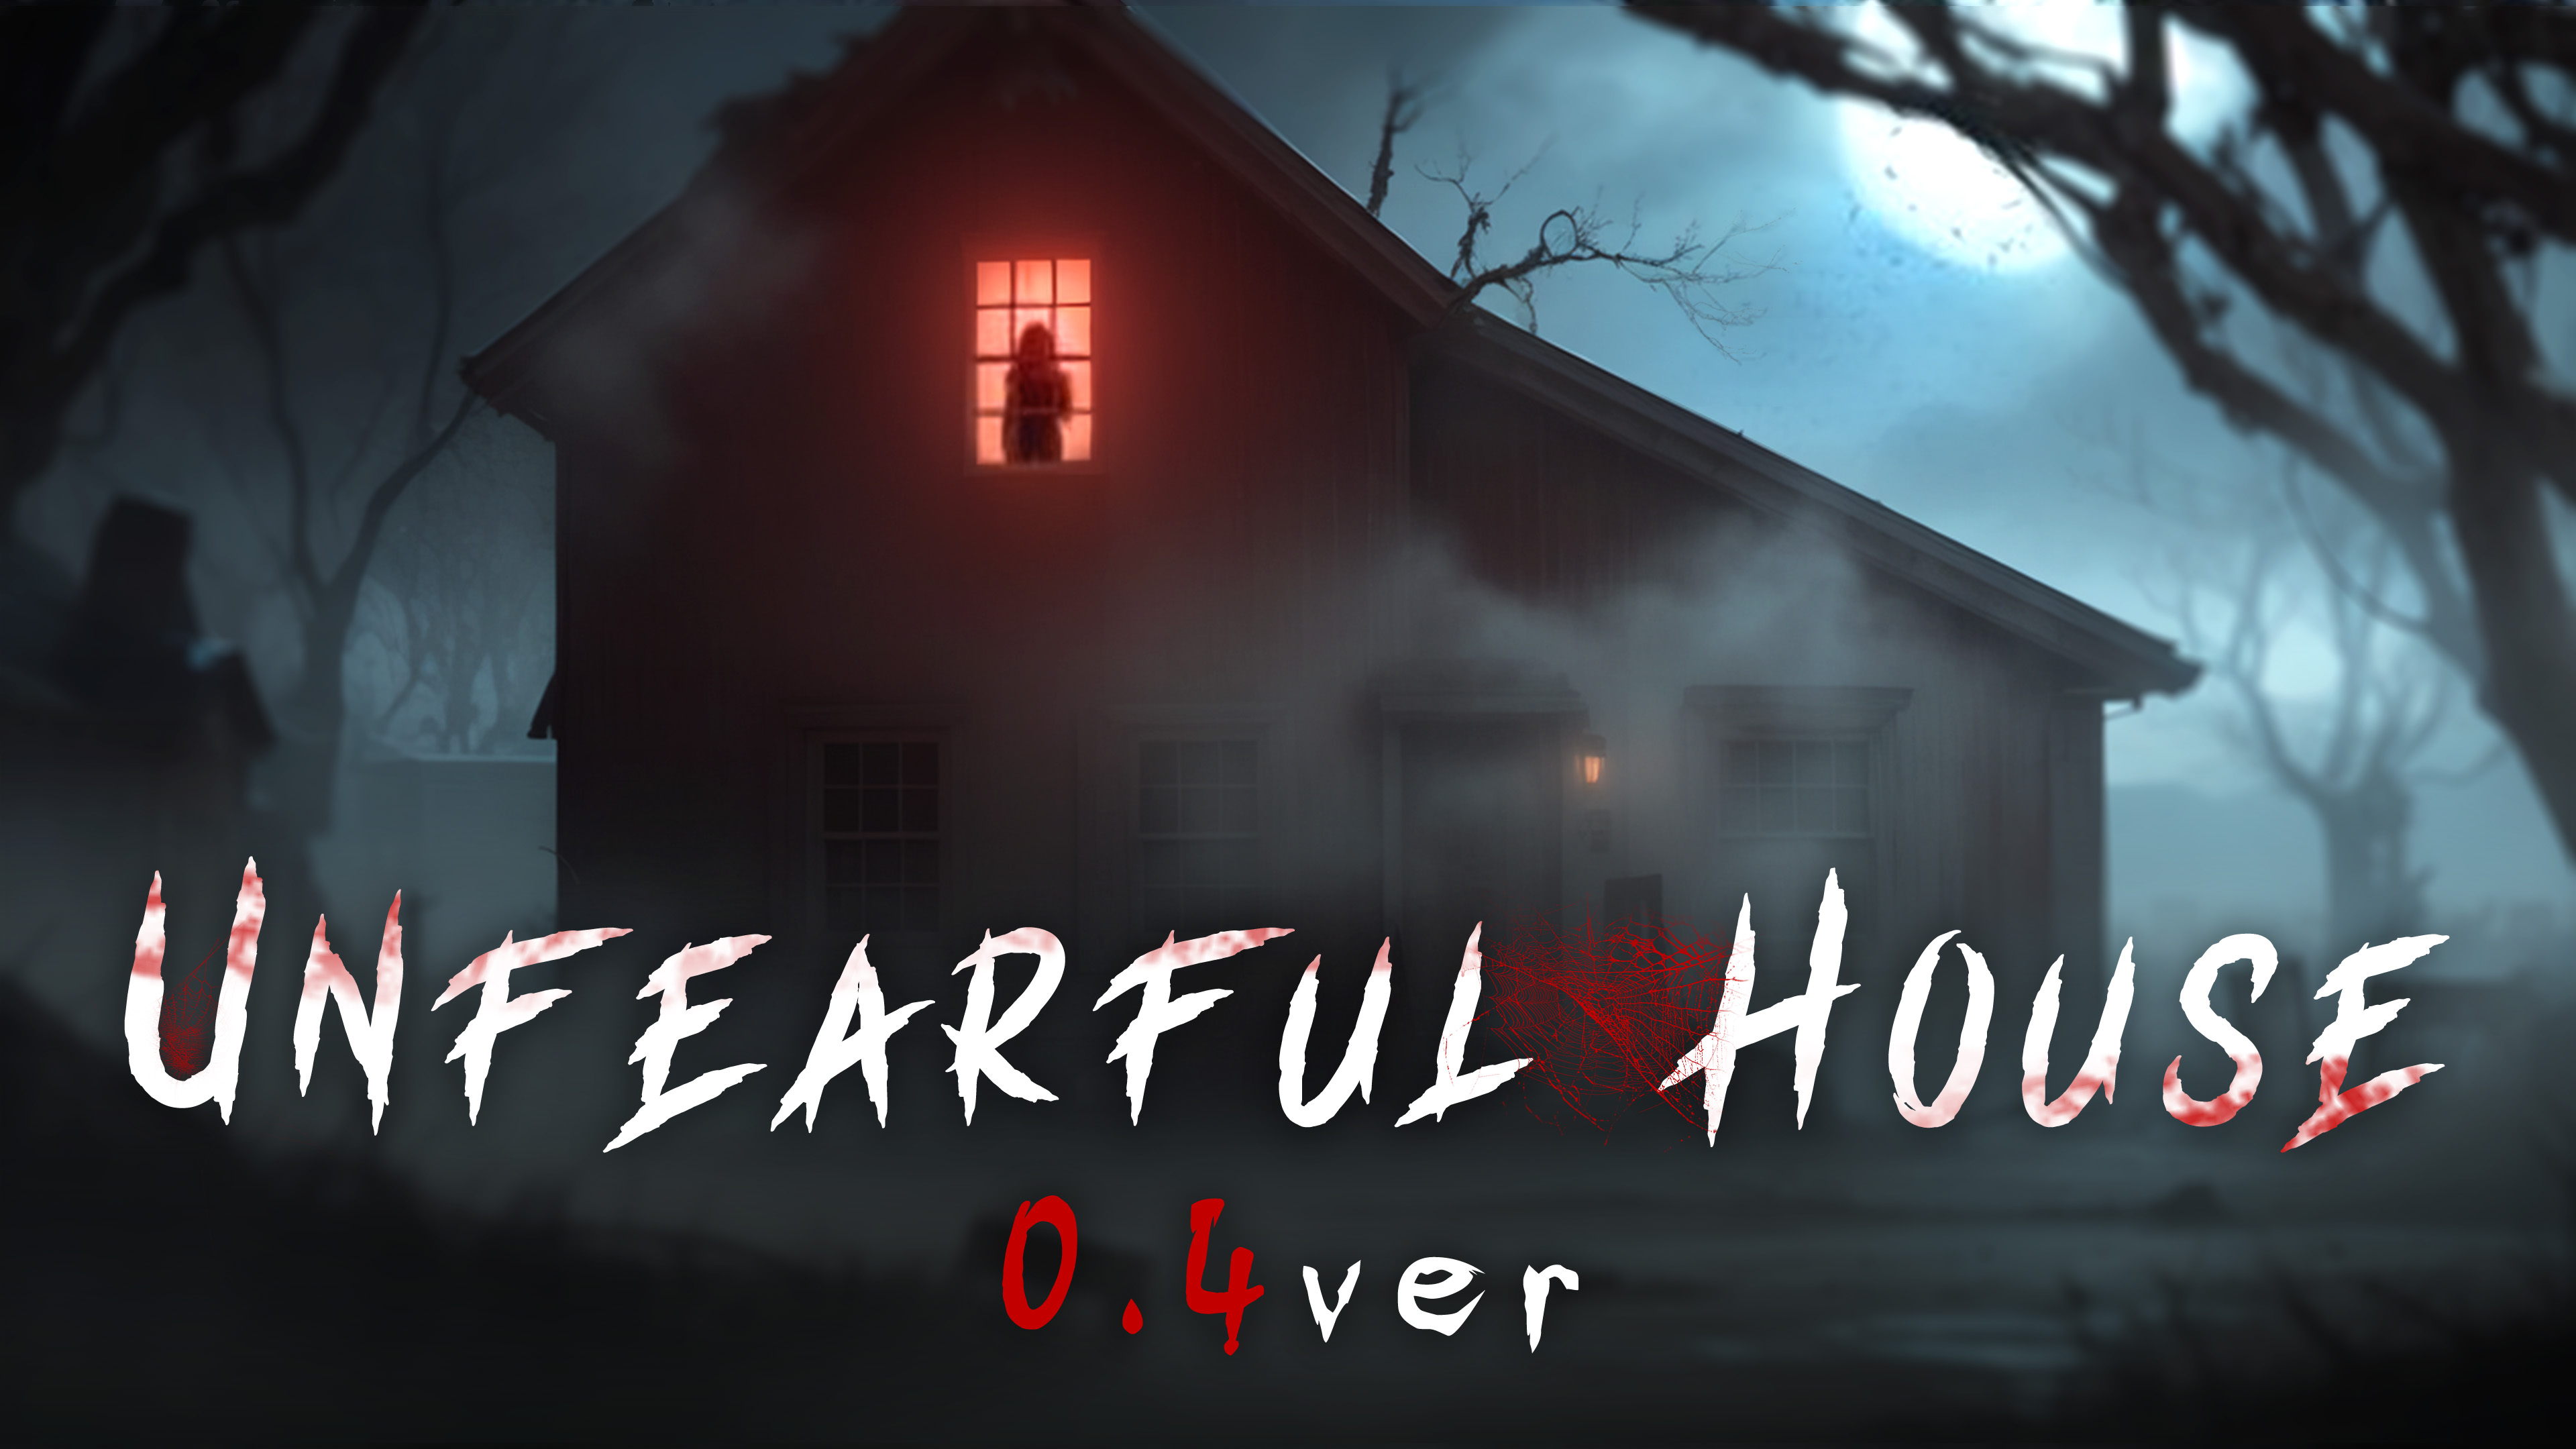 unfearful house 0.4ver